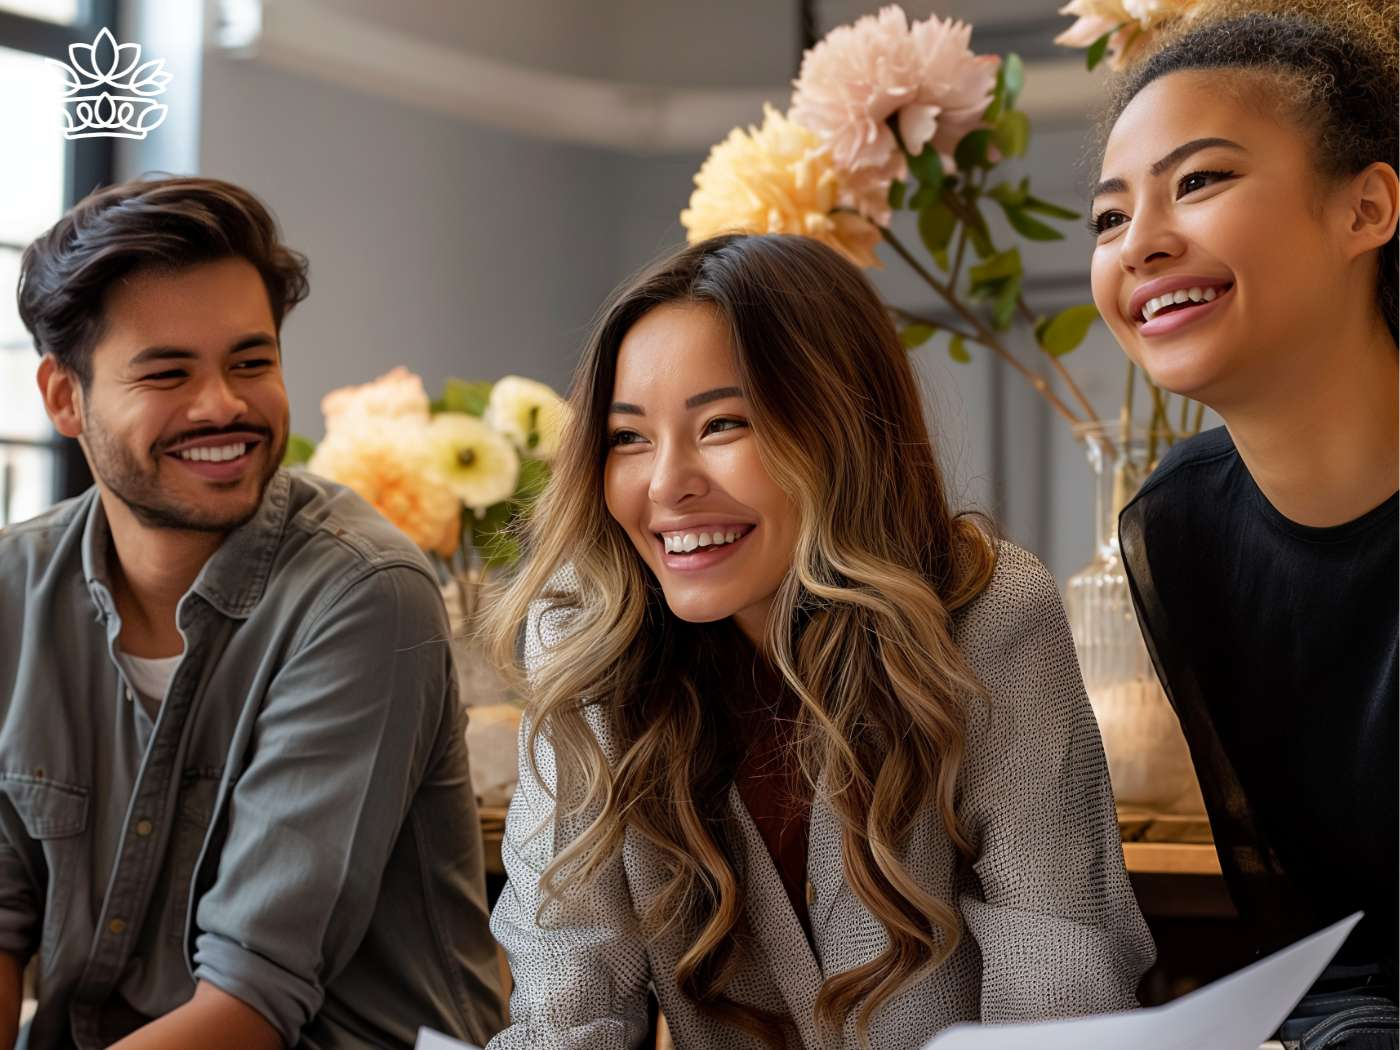 A group of three happy colleagues enjoying a light-hearted moment together, with elegant blooms in the background, at Fabulous Flowers and Gifts.